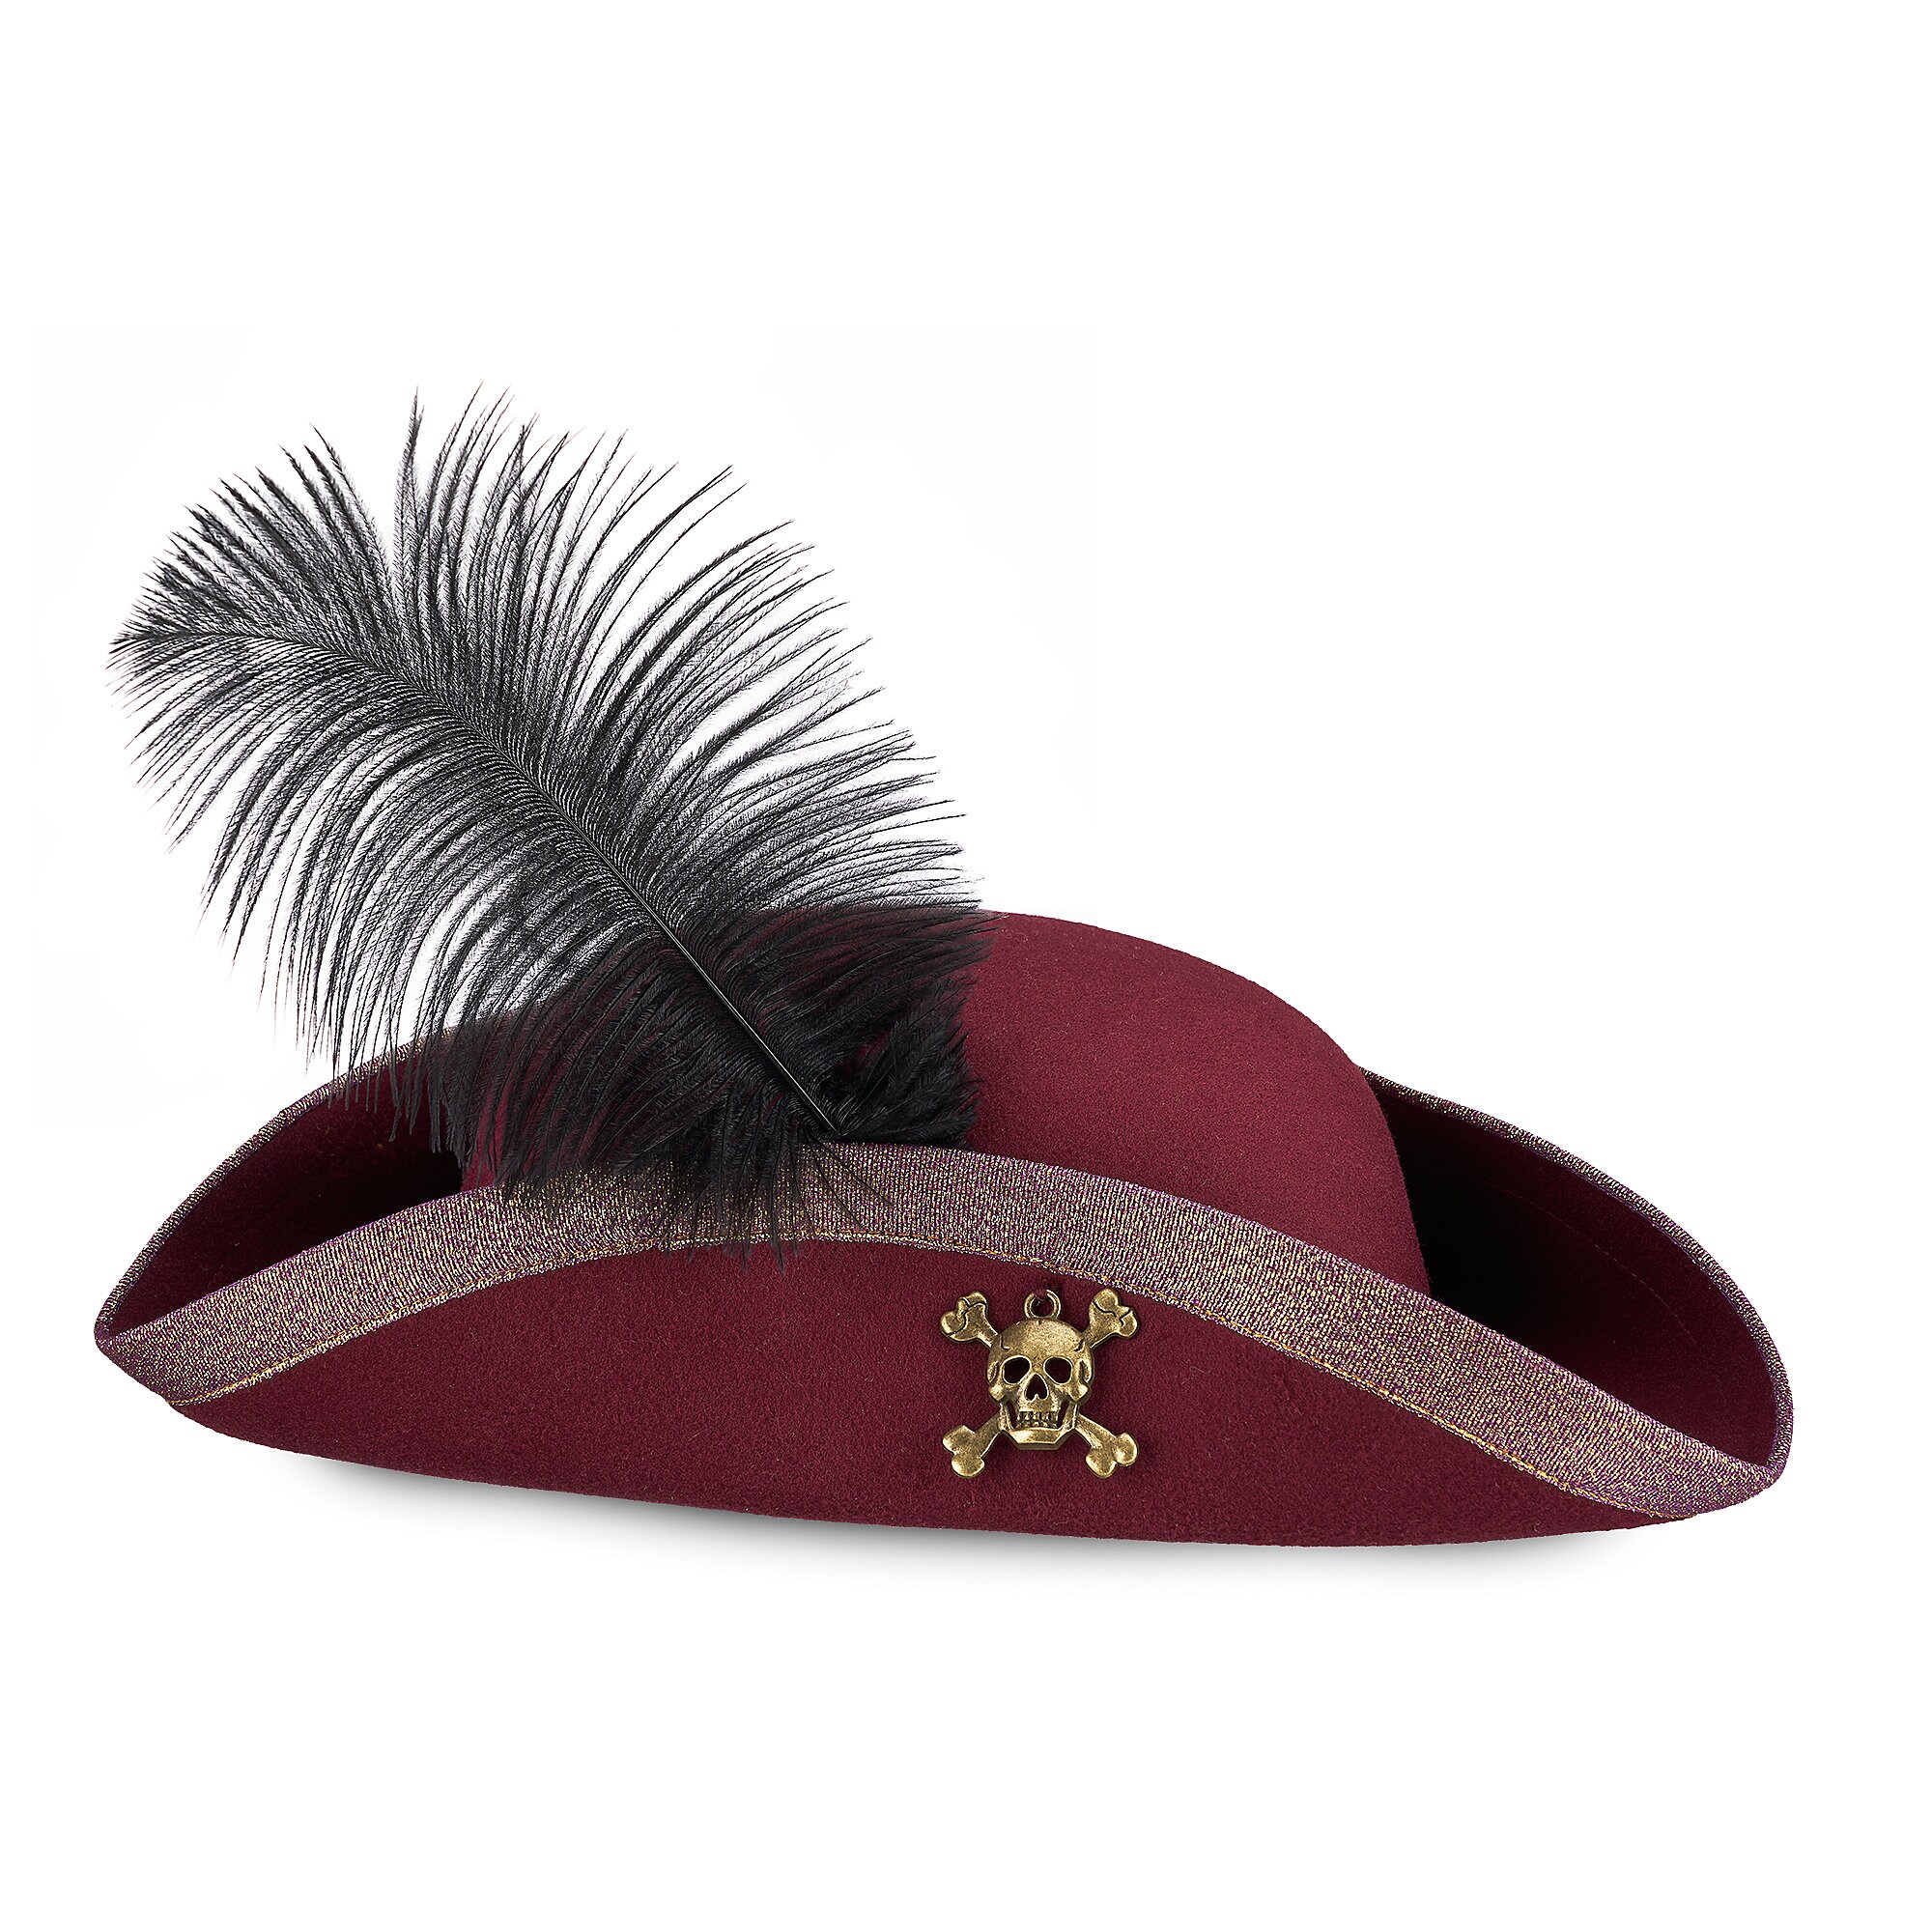 Redd Pirate Hat for Adults - Pirates of the Caribbean